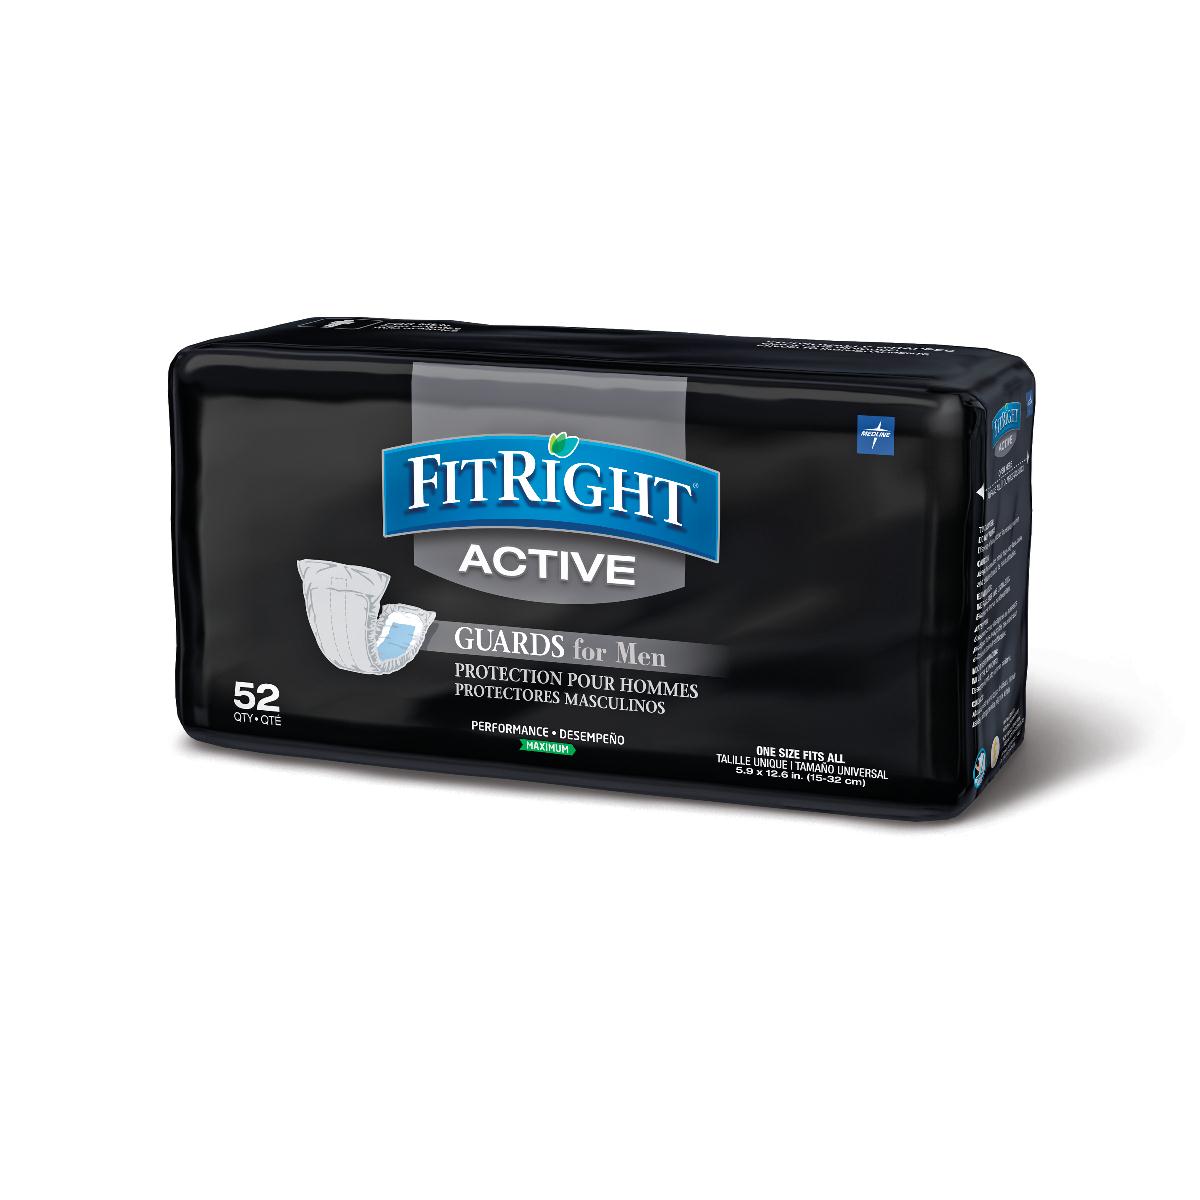 FitRight Active Guards for Men 6